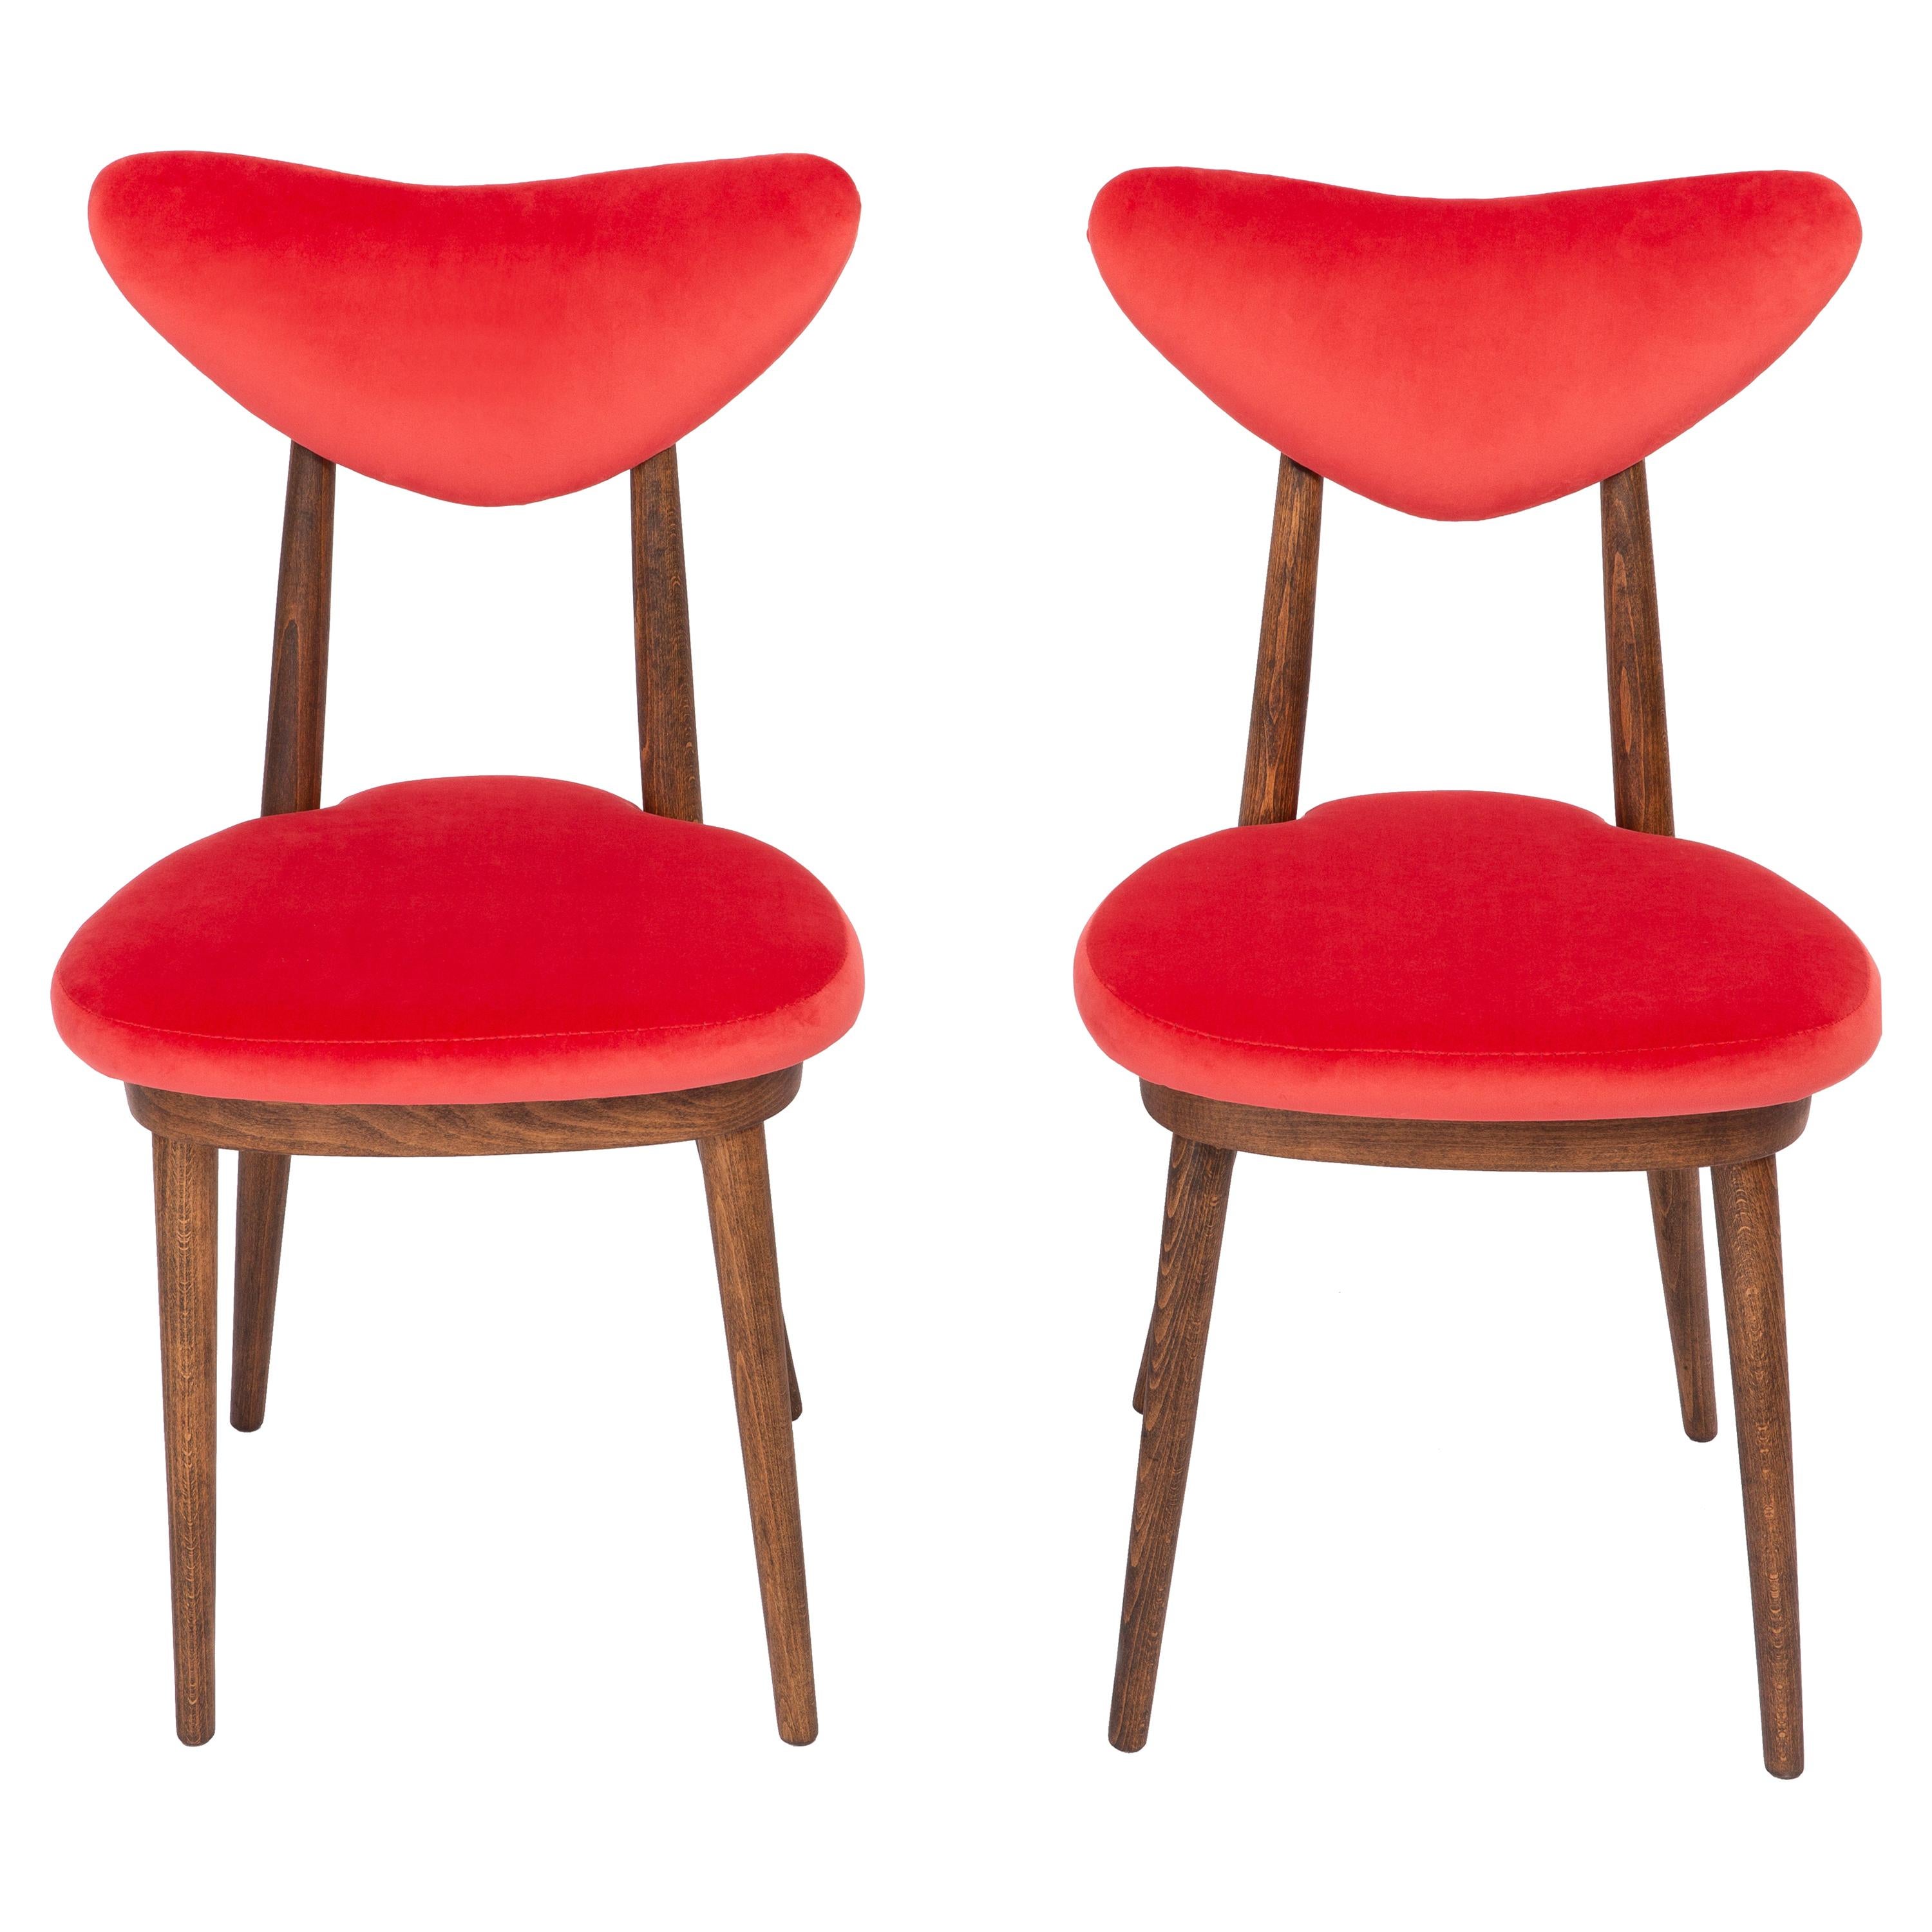 Pair of Red Heart Chairs, Poland, 1960s